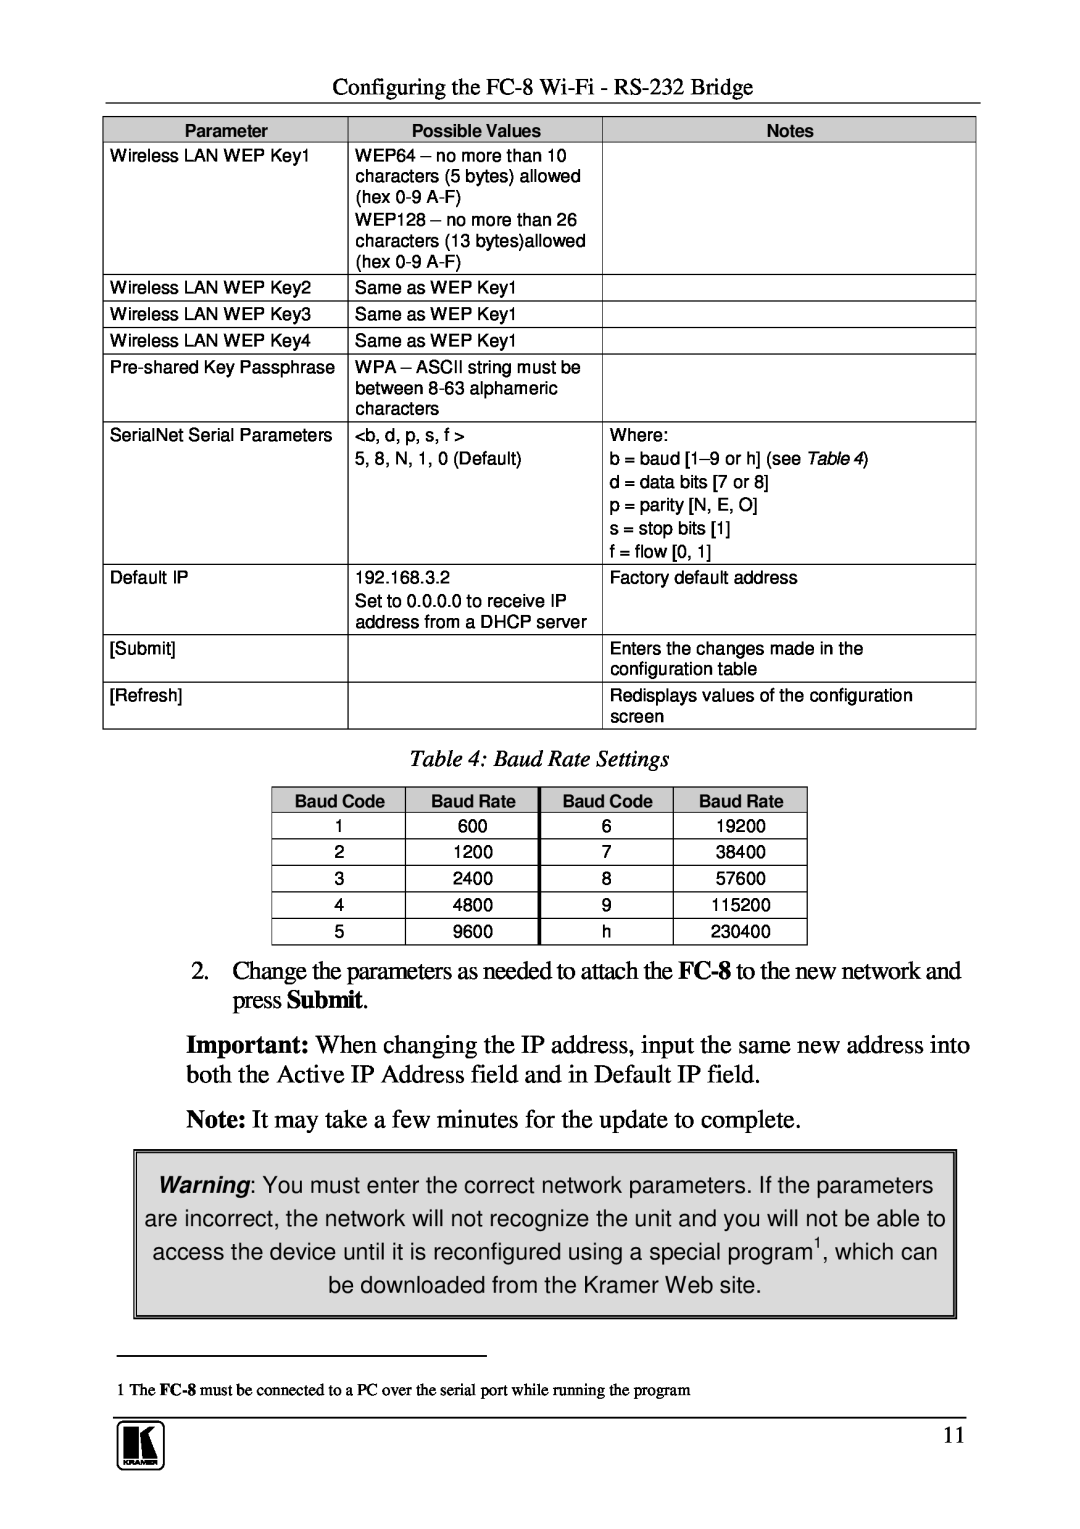 Kramer Electronics FC-8 user manual Note It may take a few minutes for the update to complete 